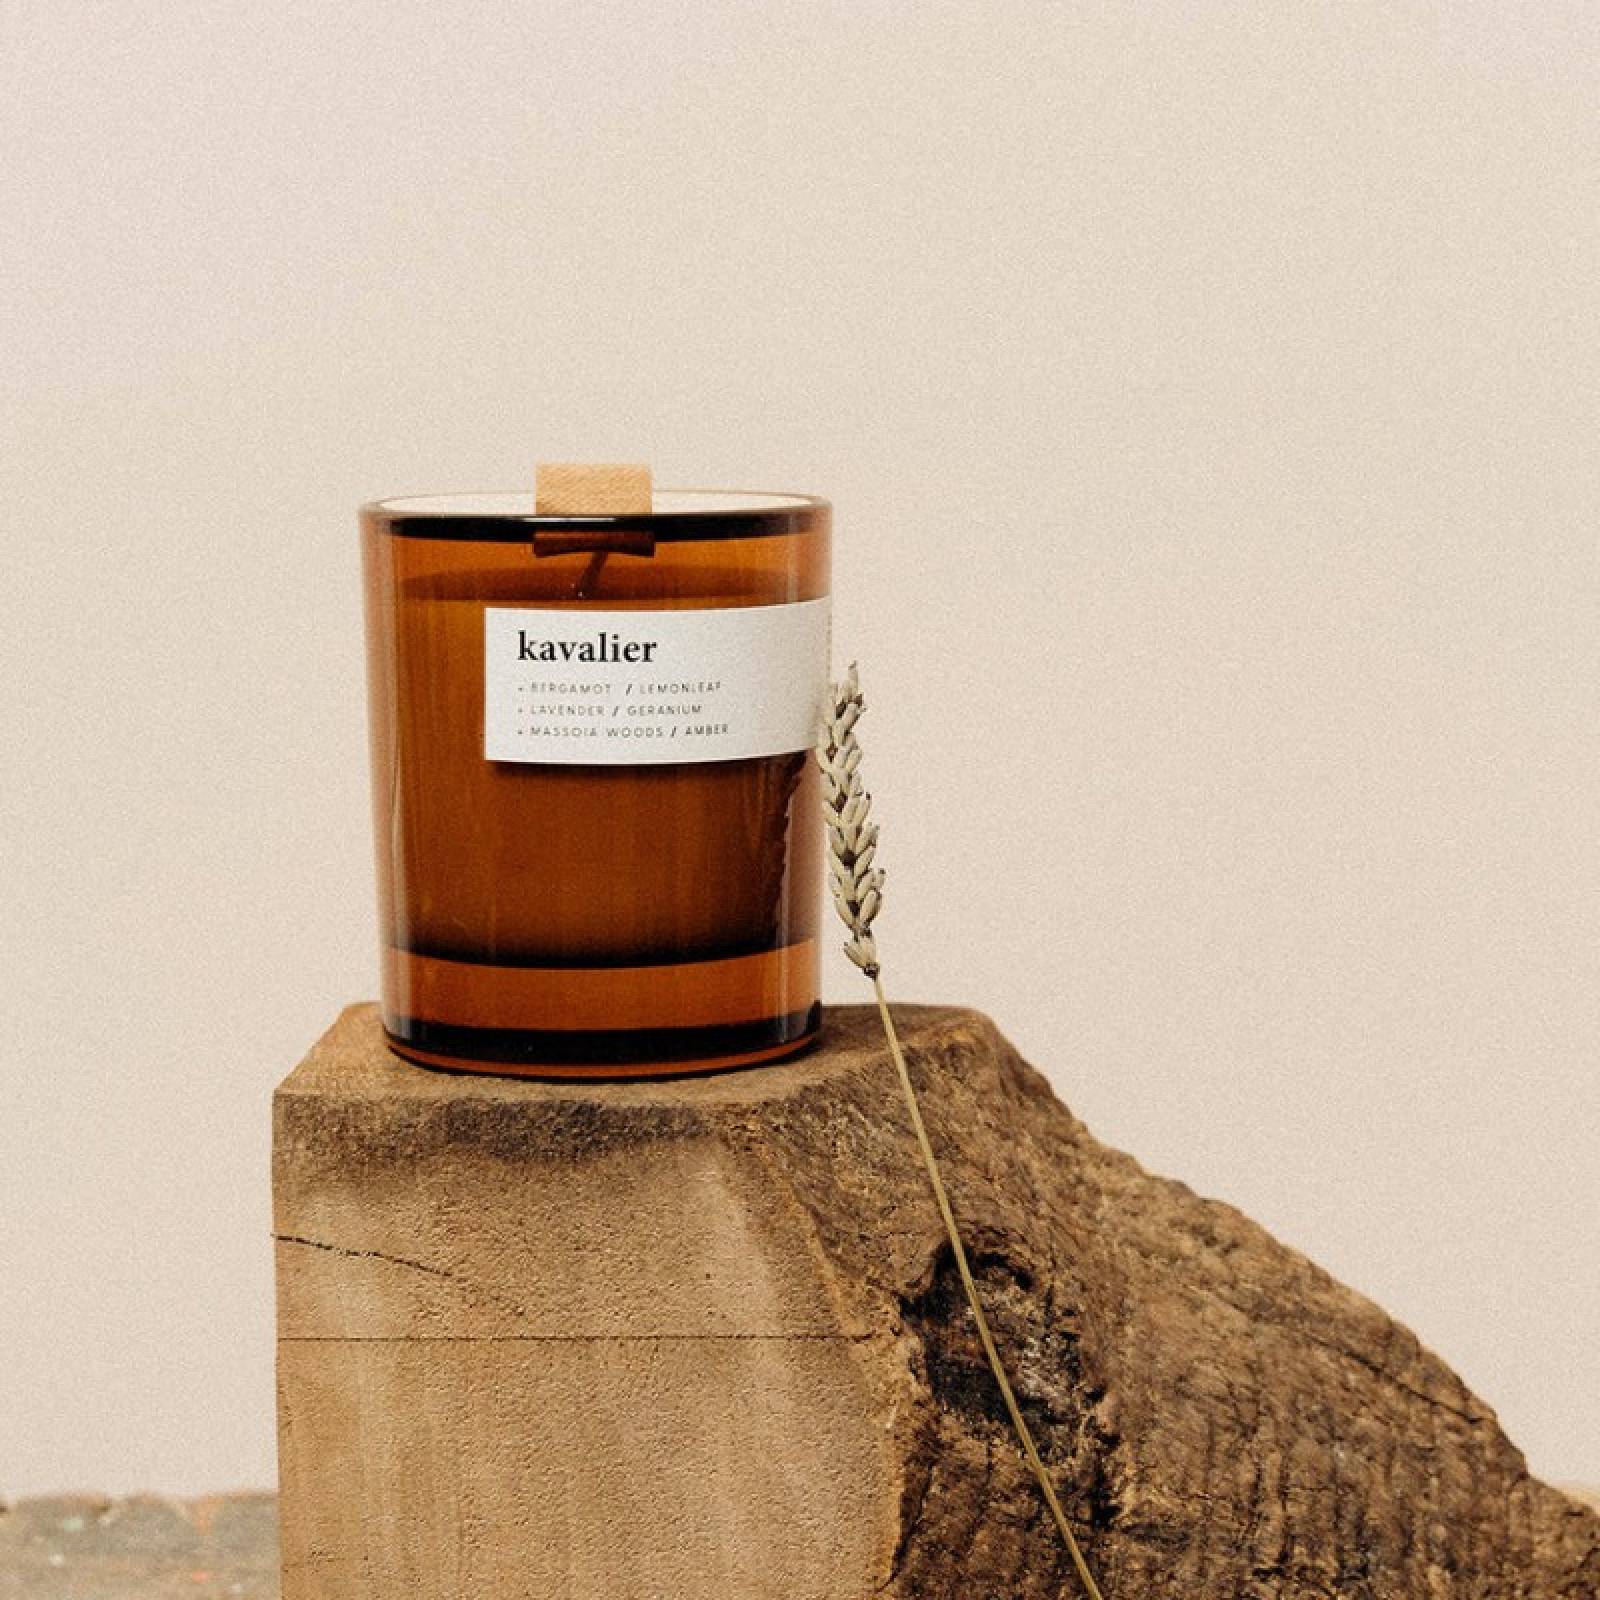 Kavalier - Candle In Amber Glass Jar 200g